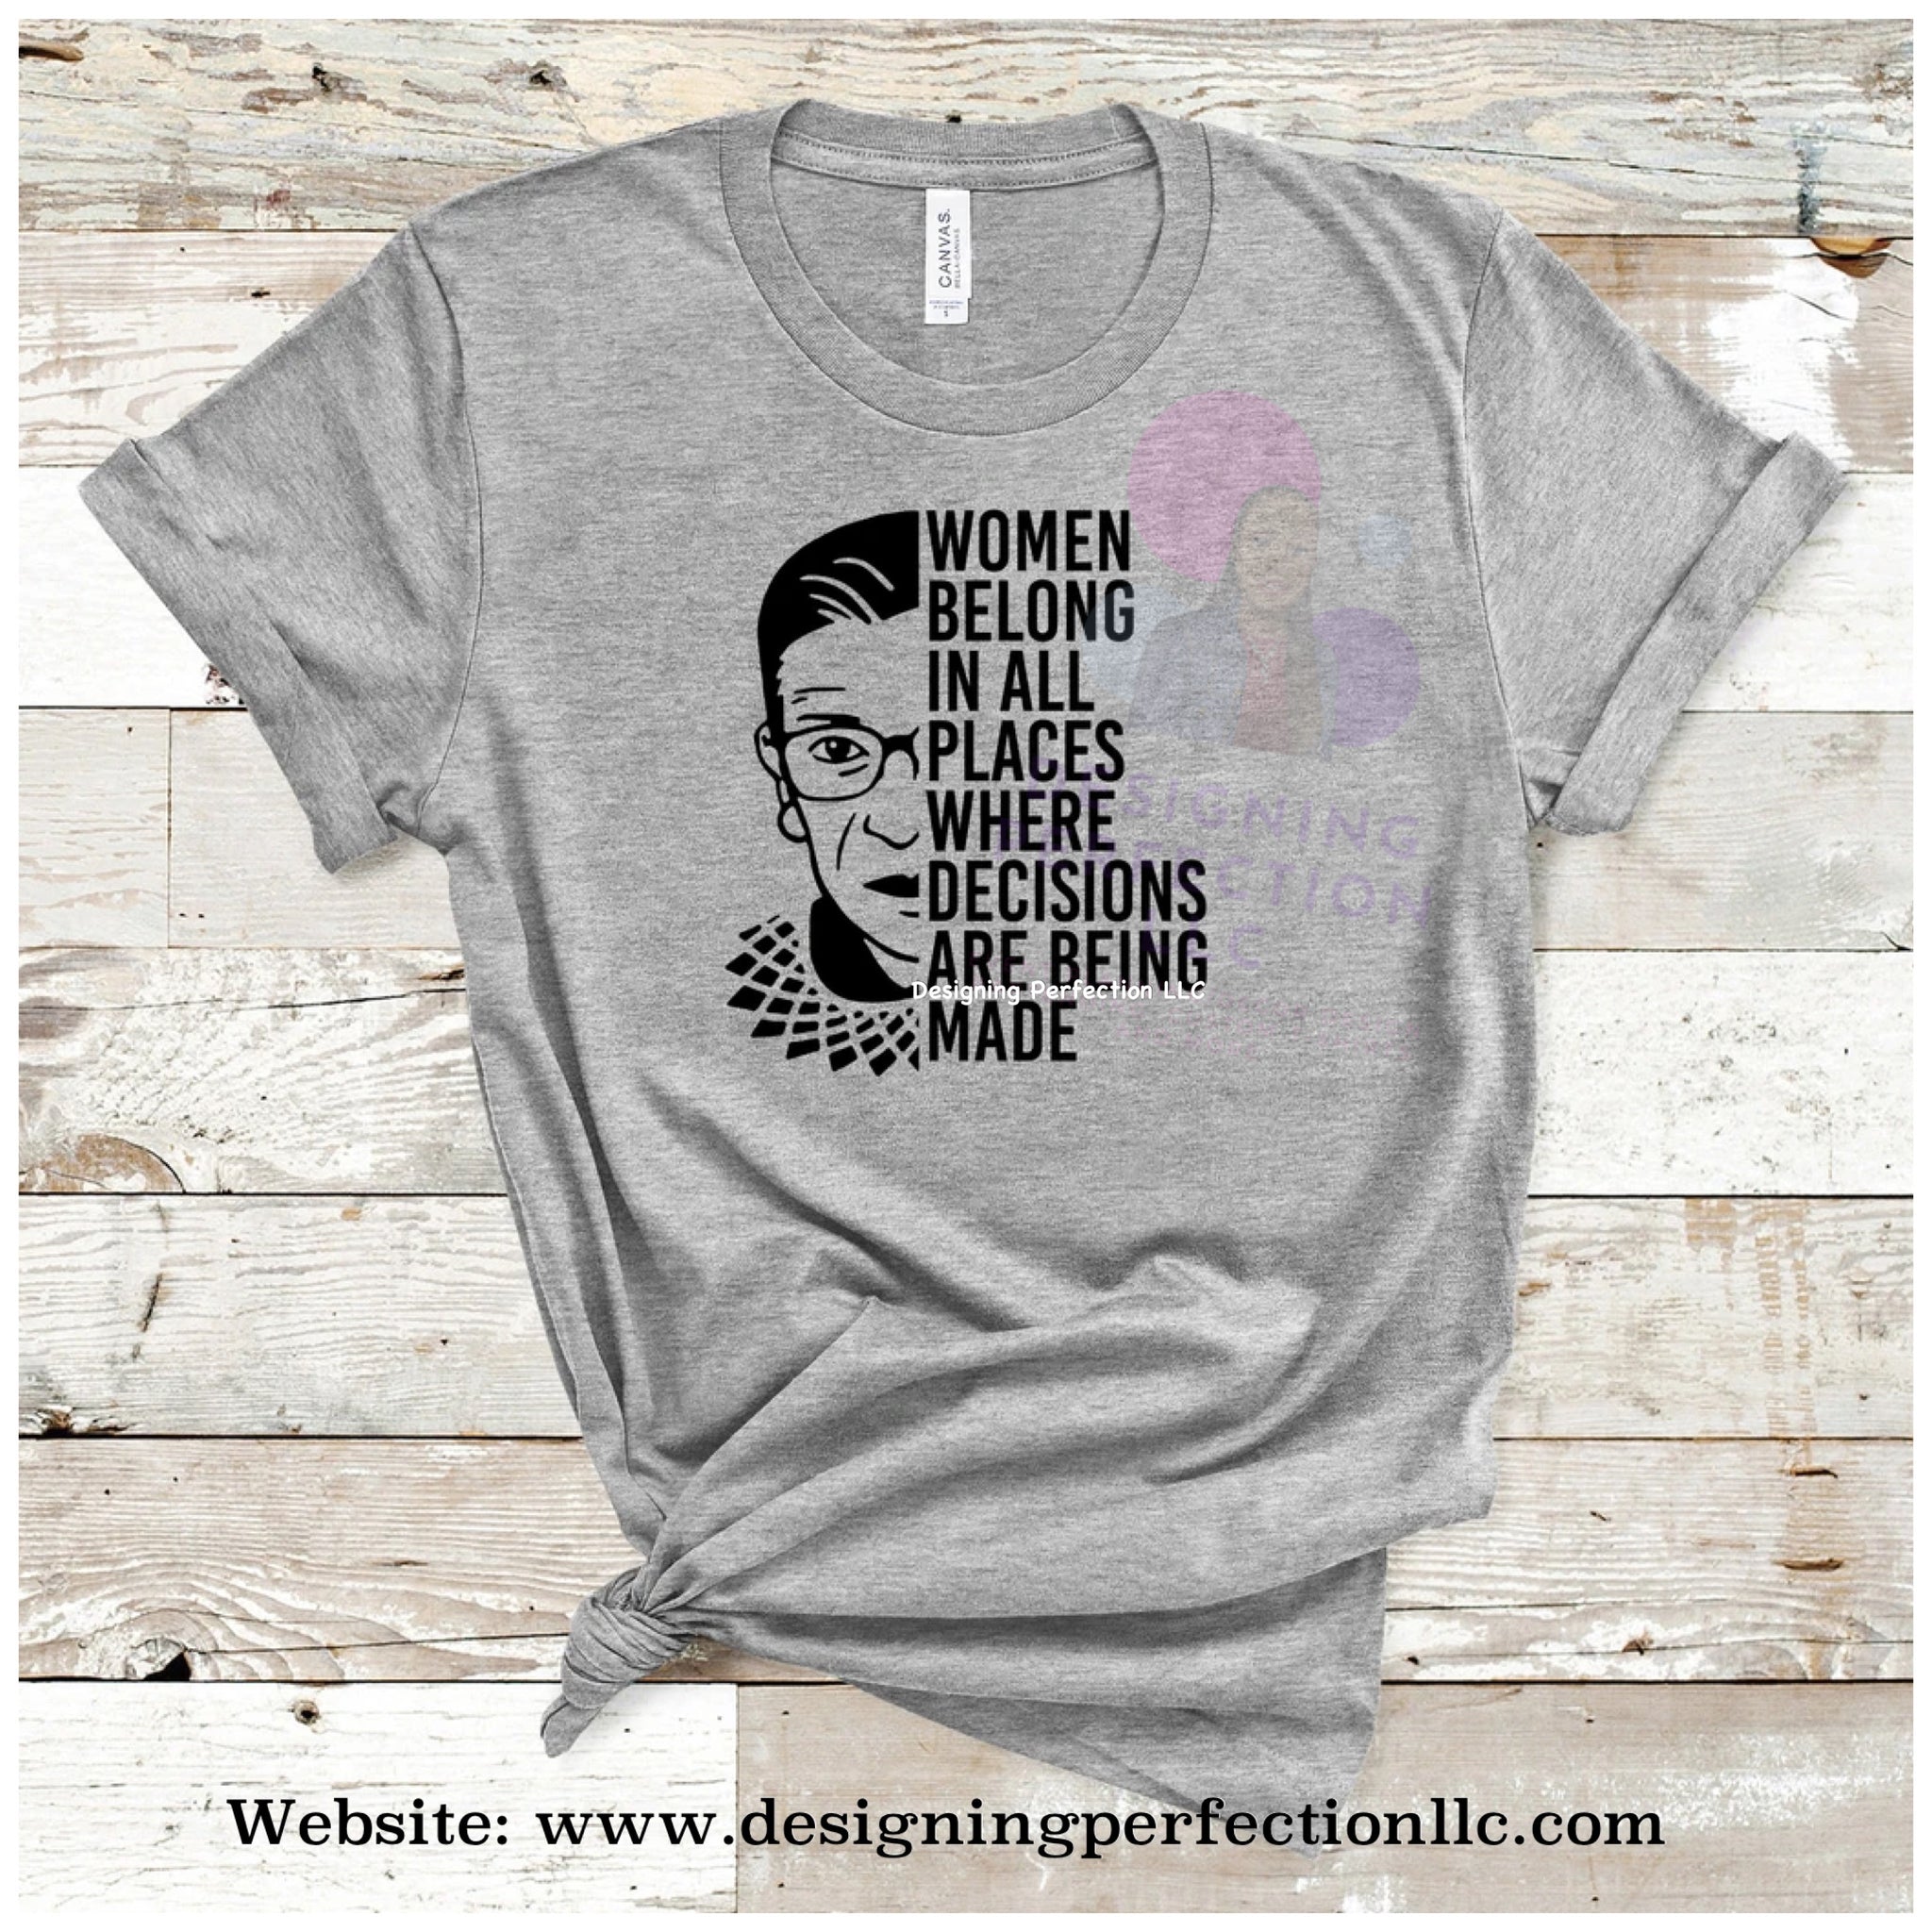 RGB Ruth - Women belong in all places (B3)